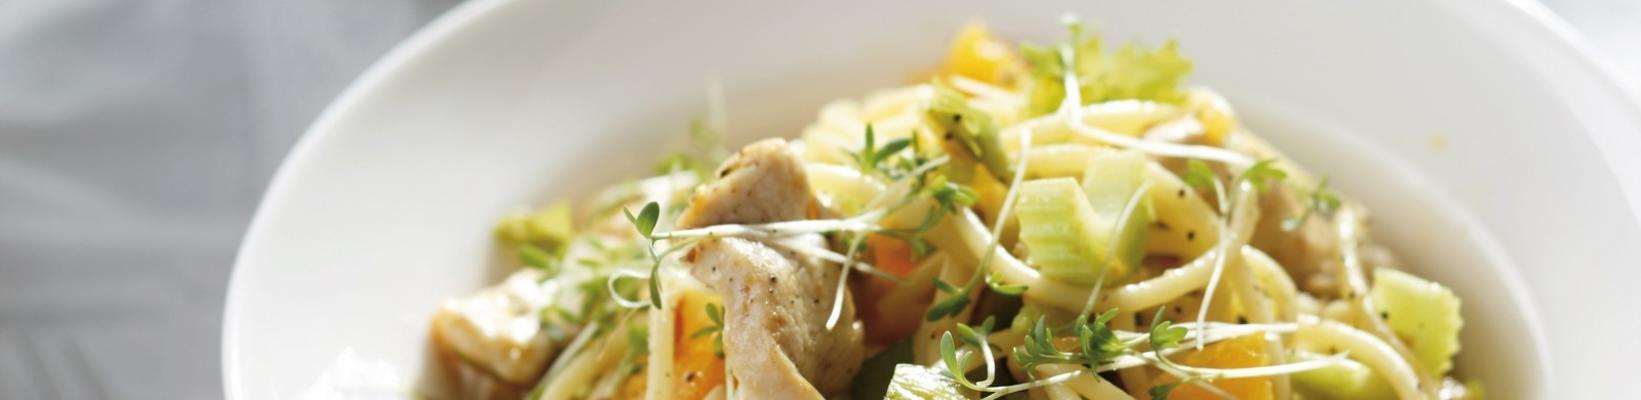 spaghetti with chicken, celery and orange